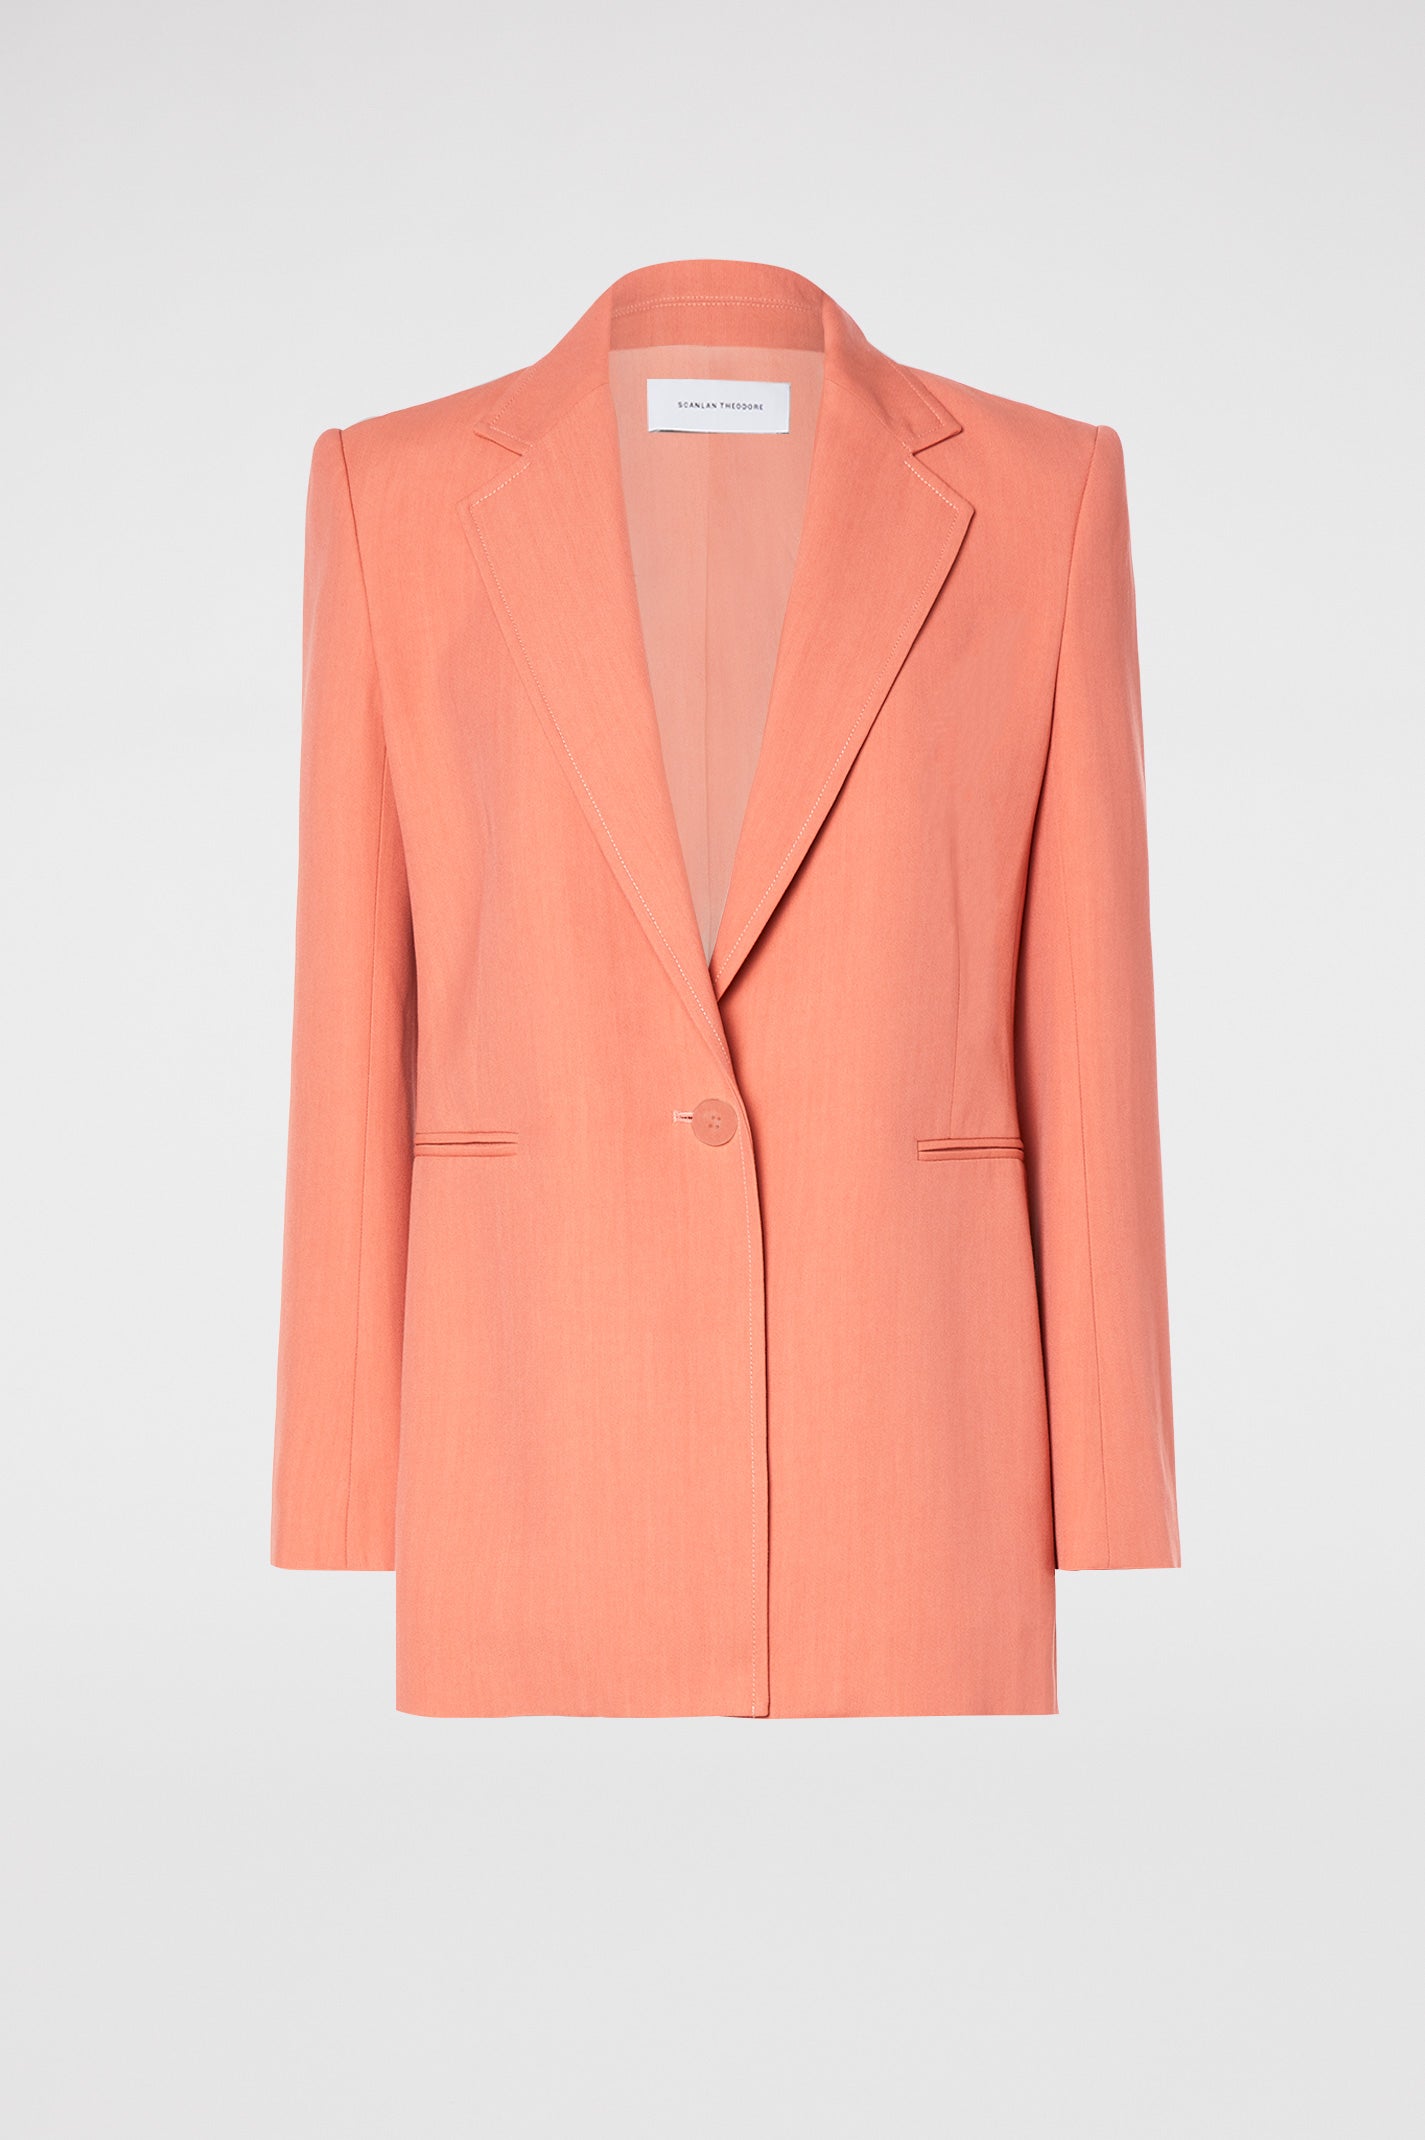 Scanlan Theodore Tailored Jacket in Coral